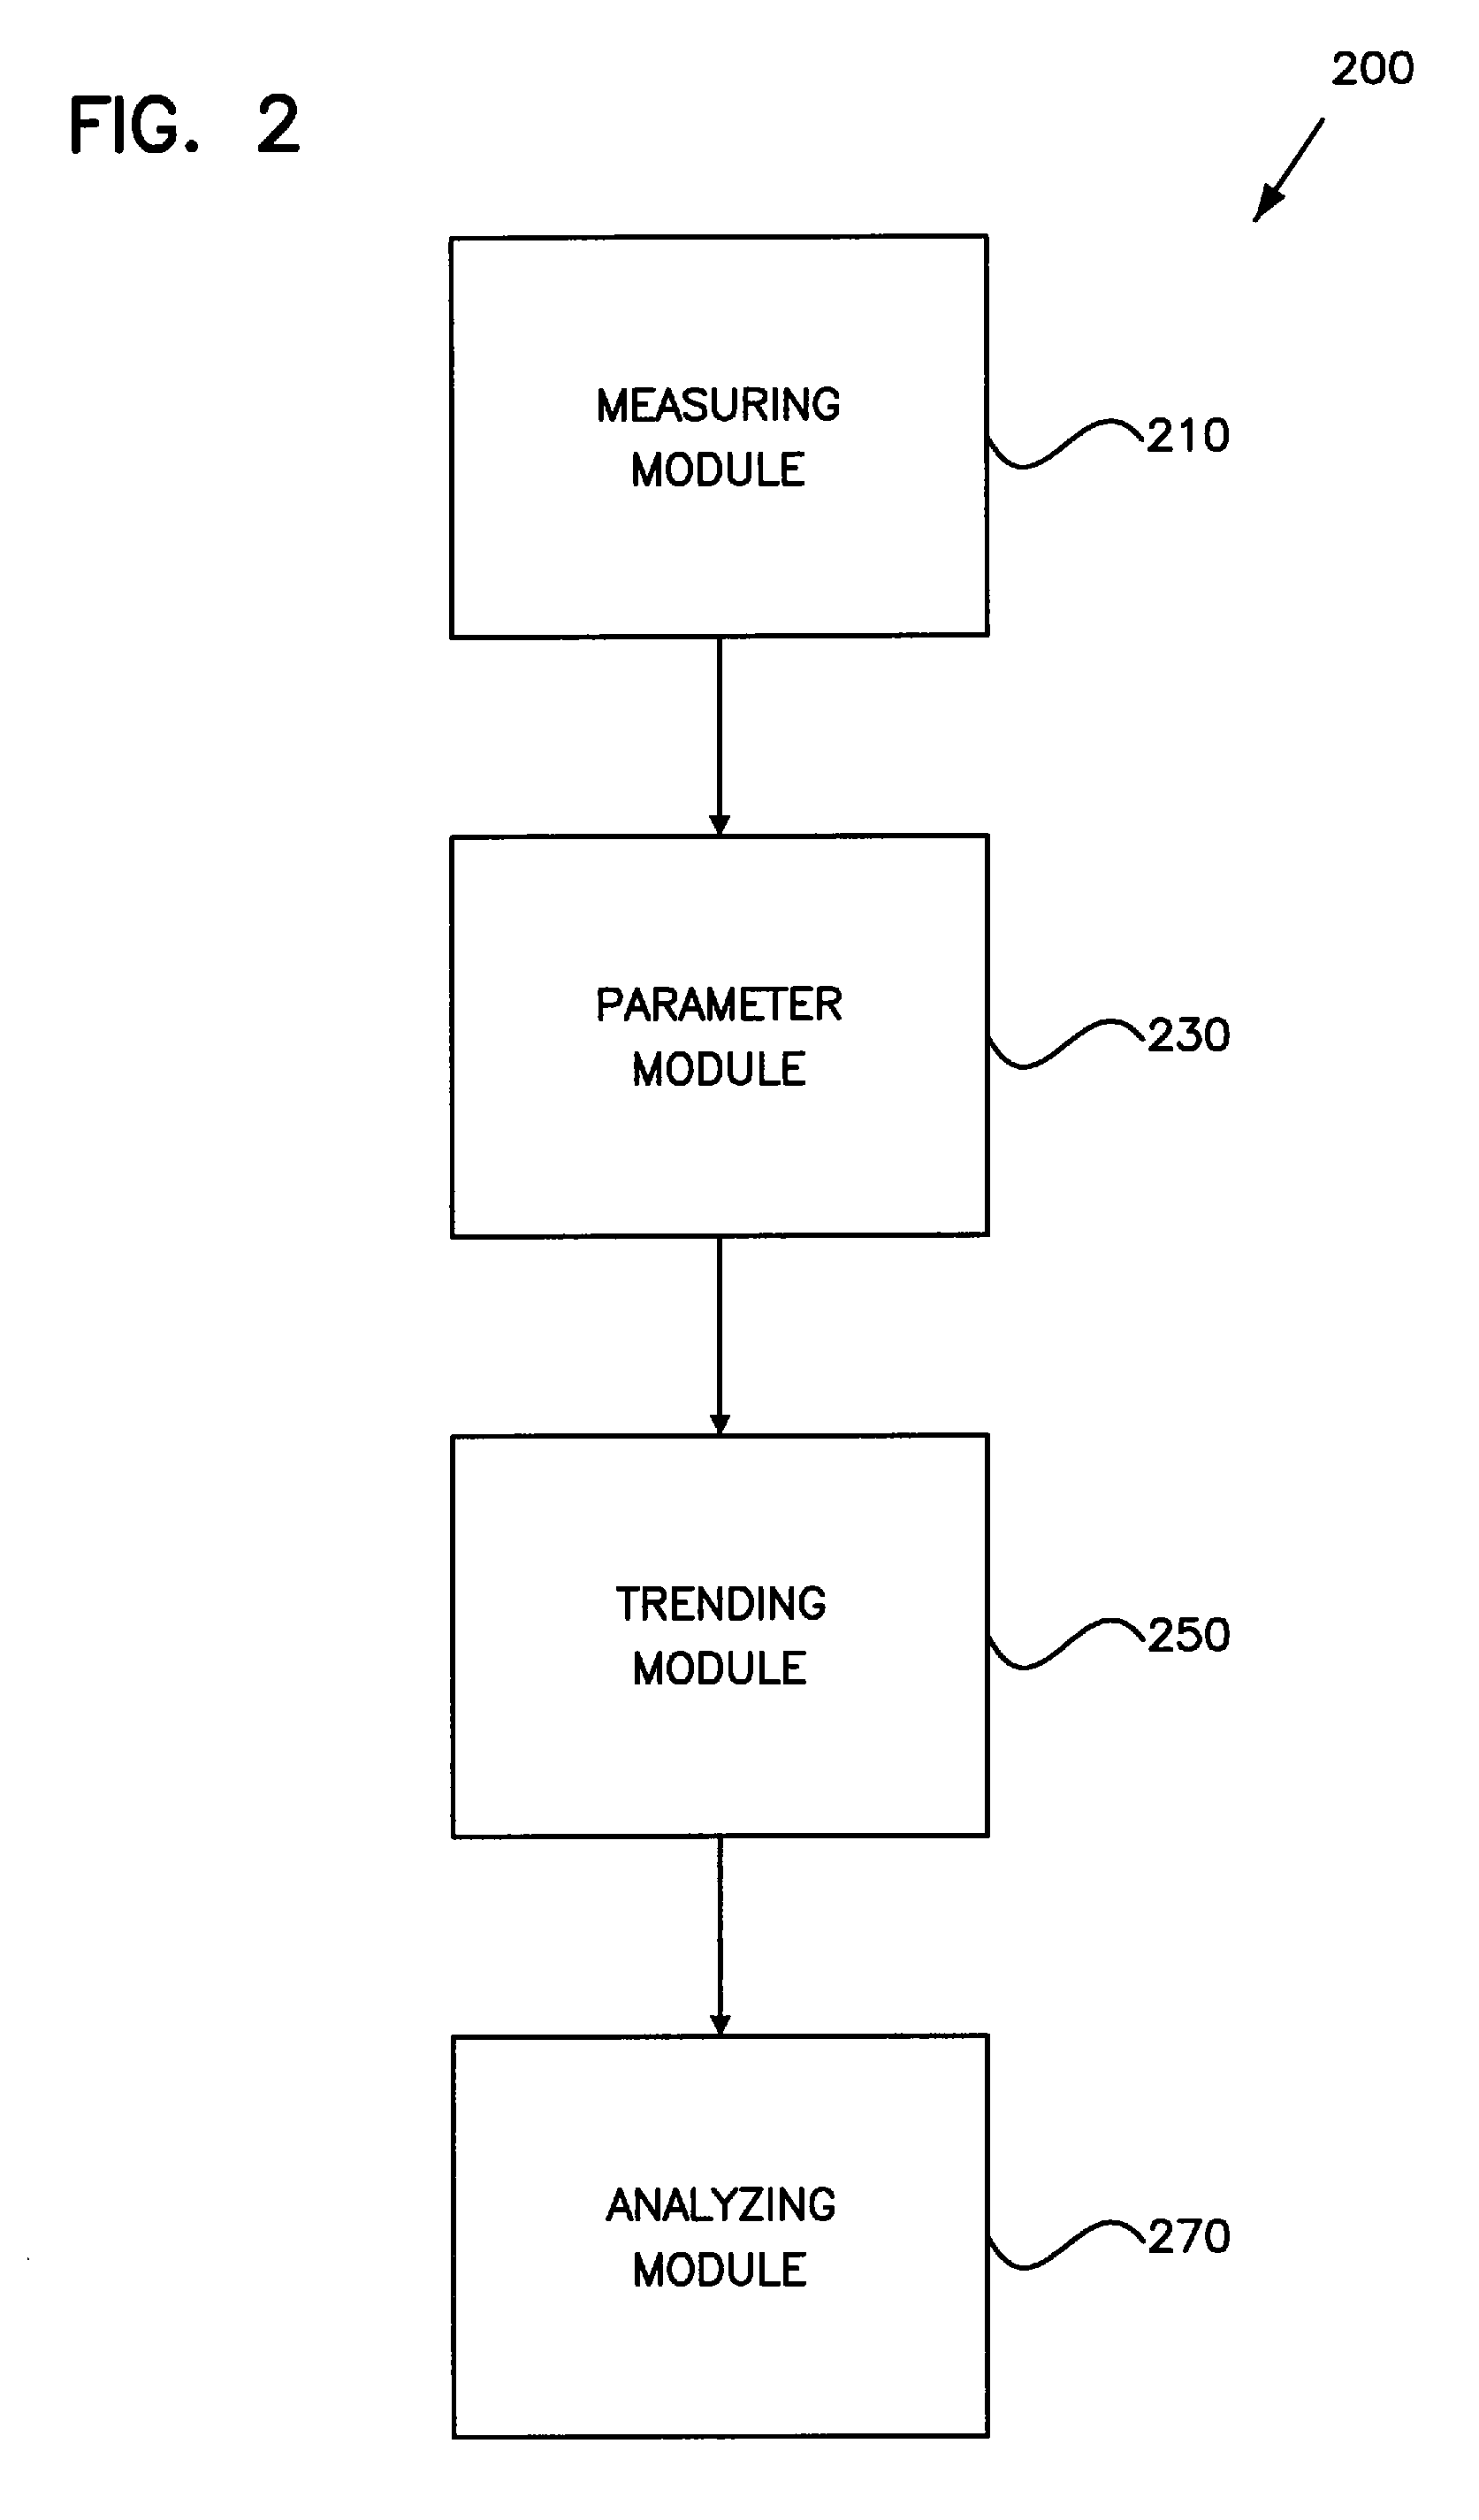 Method and apparatus for trending a physiological cardiac parameter